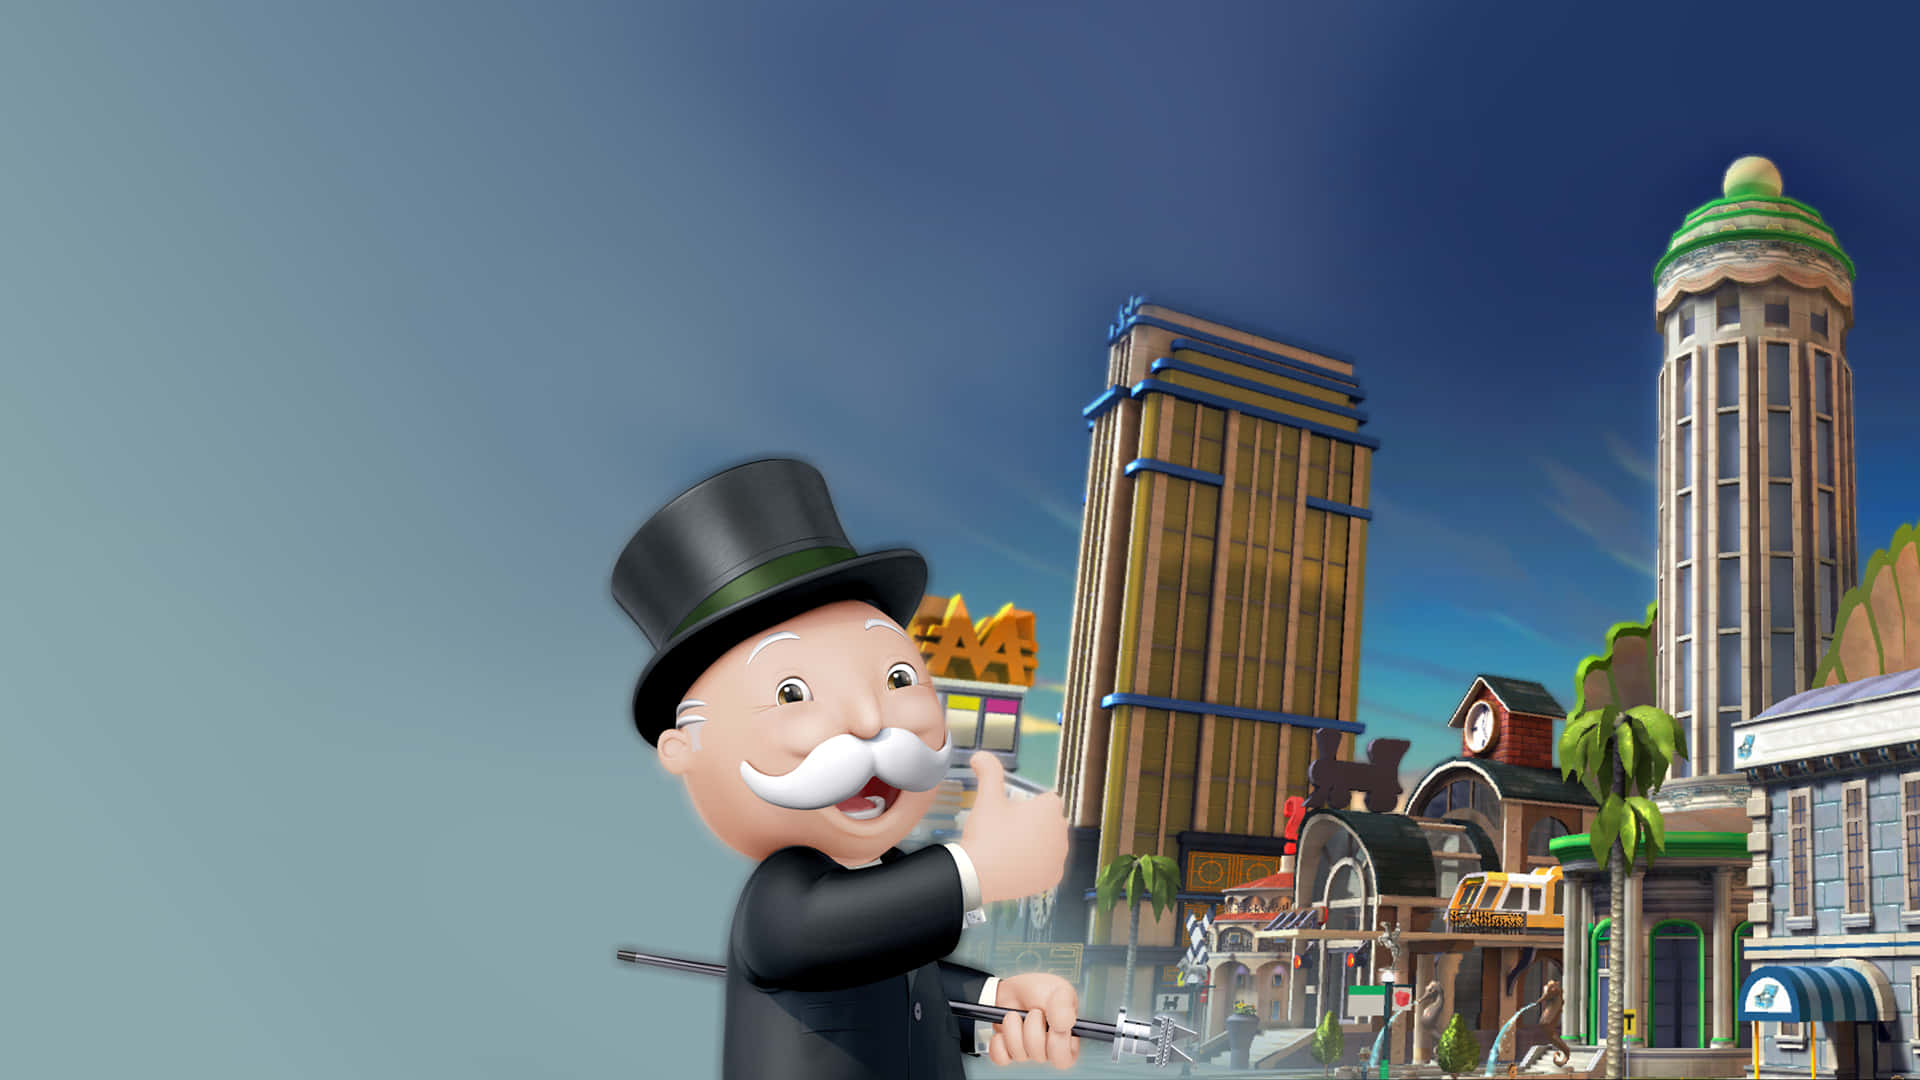 A Man In A Top Hat Is Standing In Front Of A City